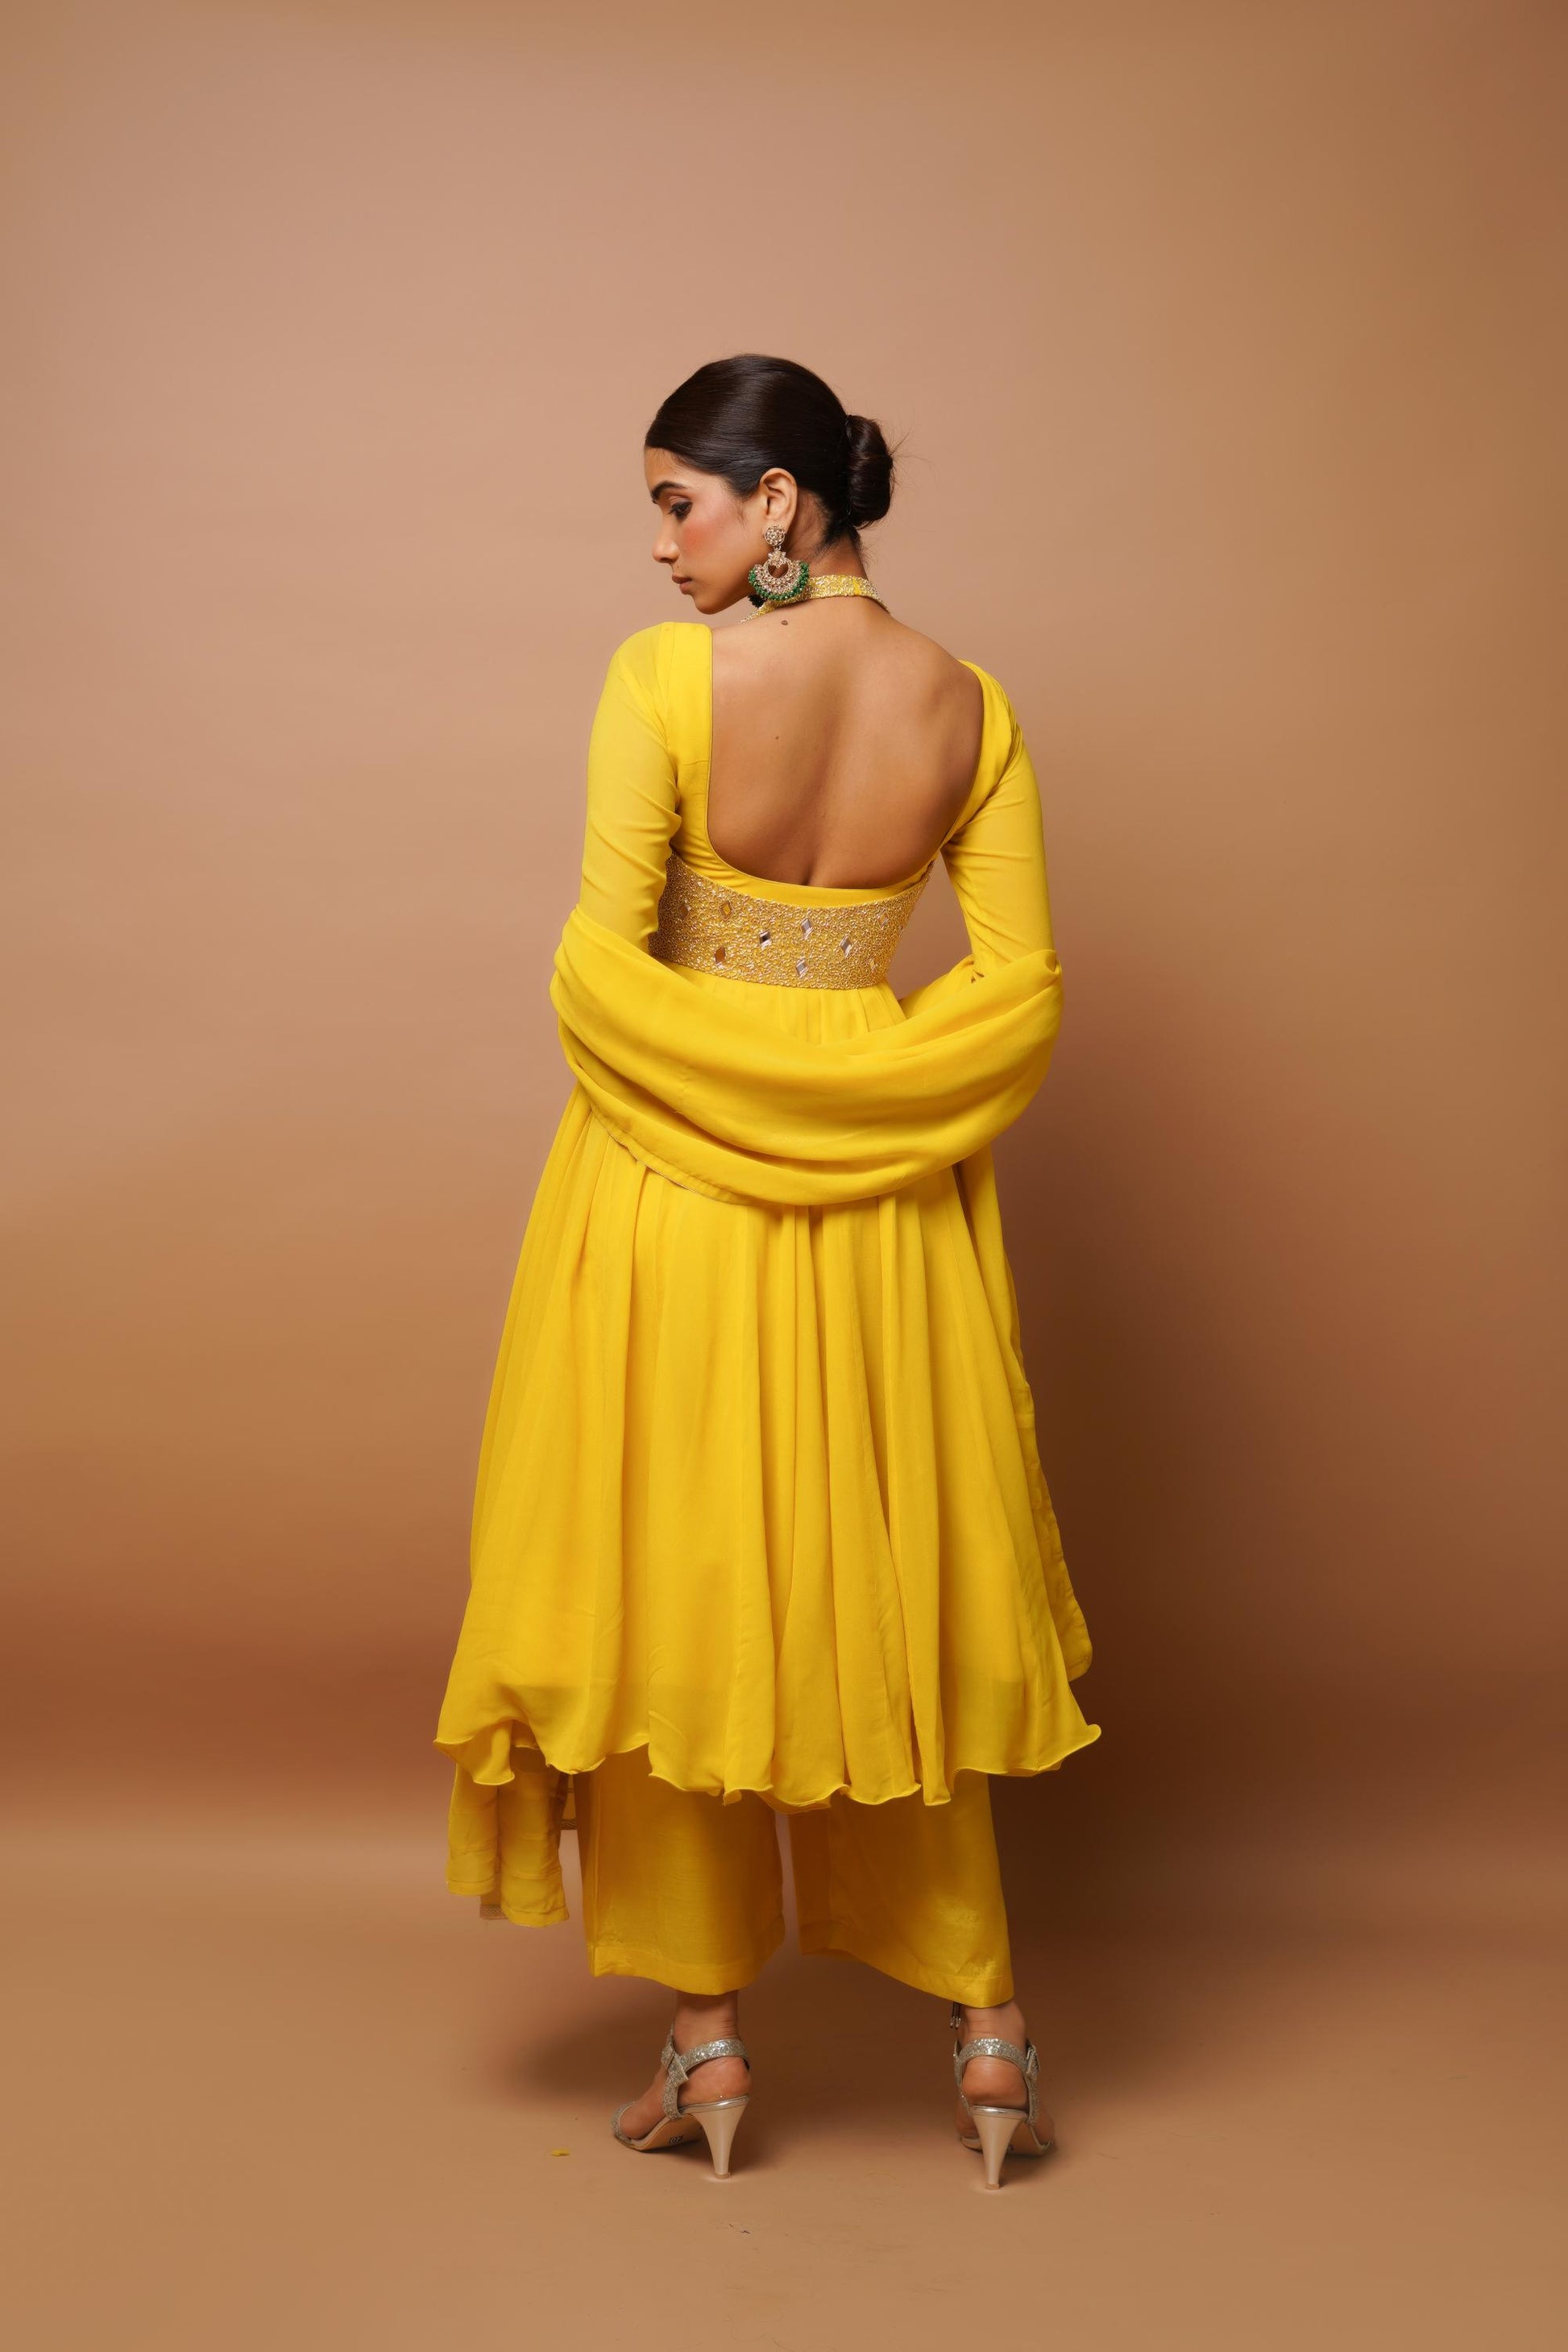 Buy Yellow Anarkali Suits Online at Best Price on Indian Cloth Store.